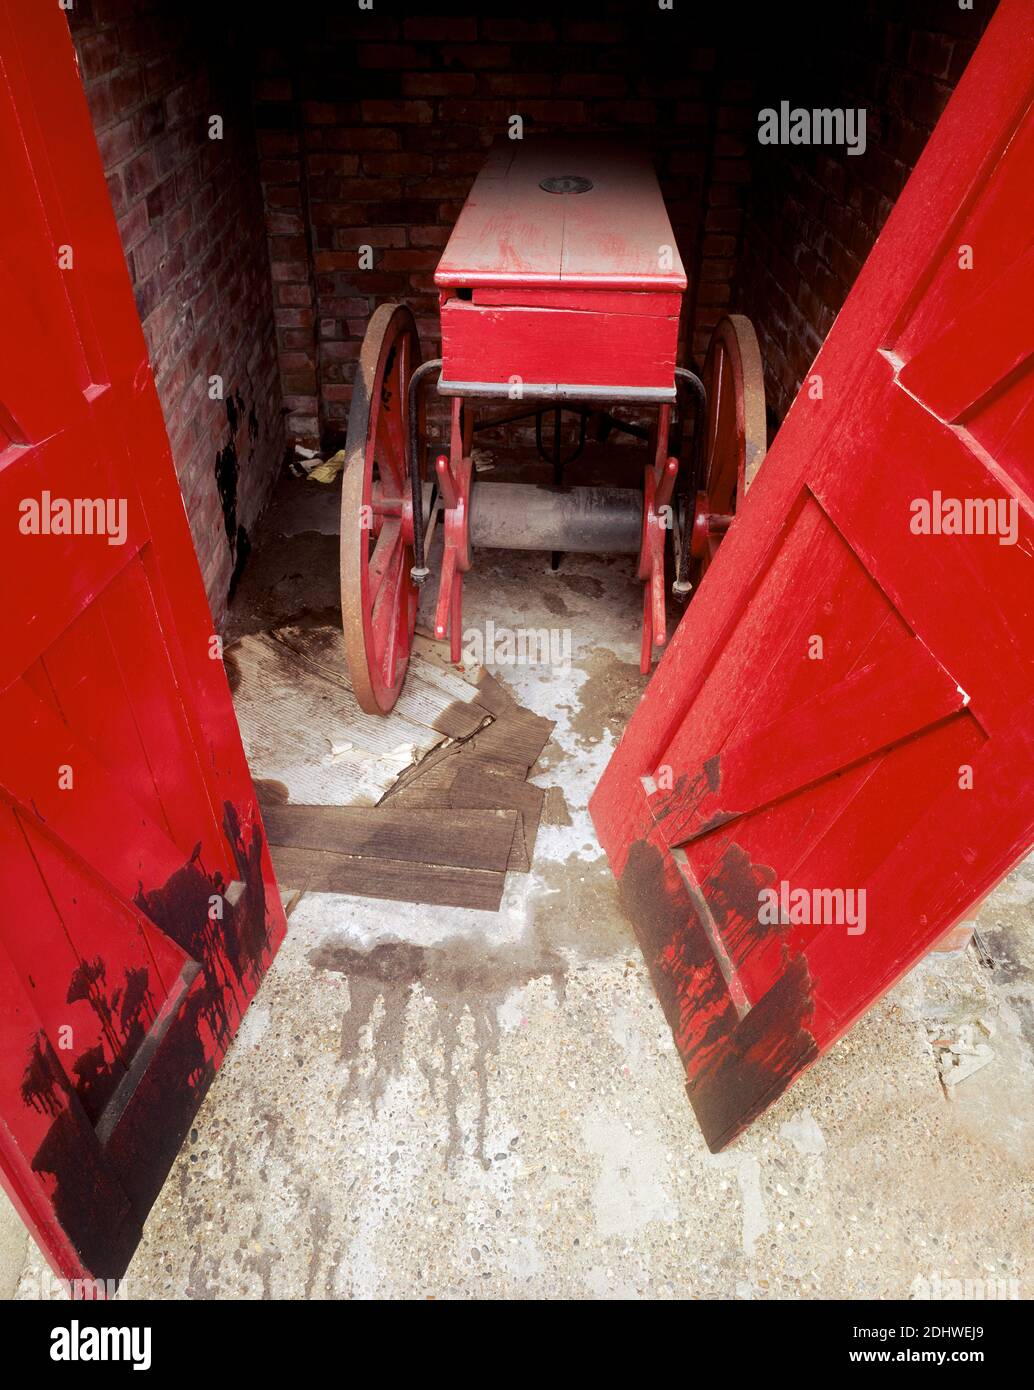 UK, London, Docklands, Isle of Dogs, shipping docks, early 1974. A firefighting handcart with hosereel. The hose would be wrapped around the axle. Stock Photo